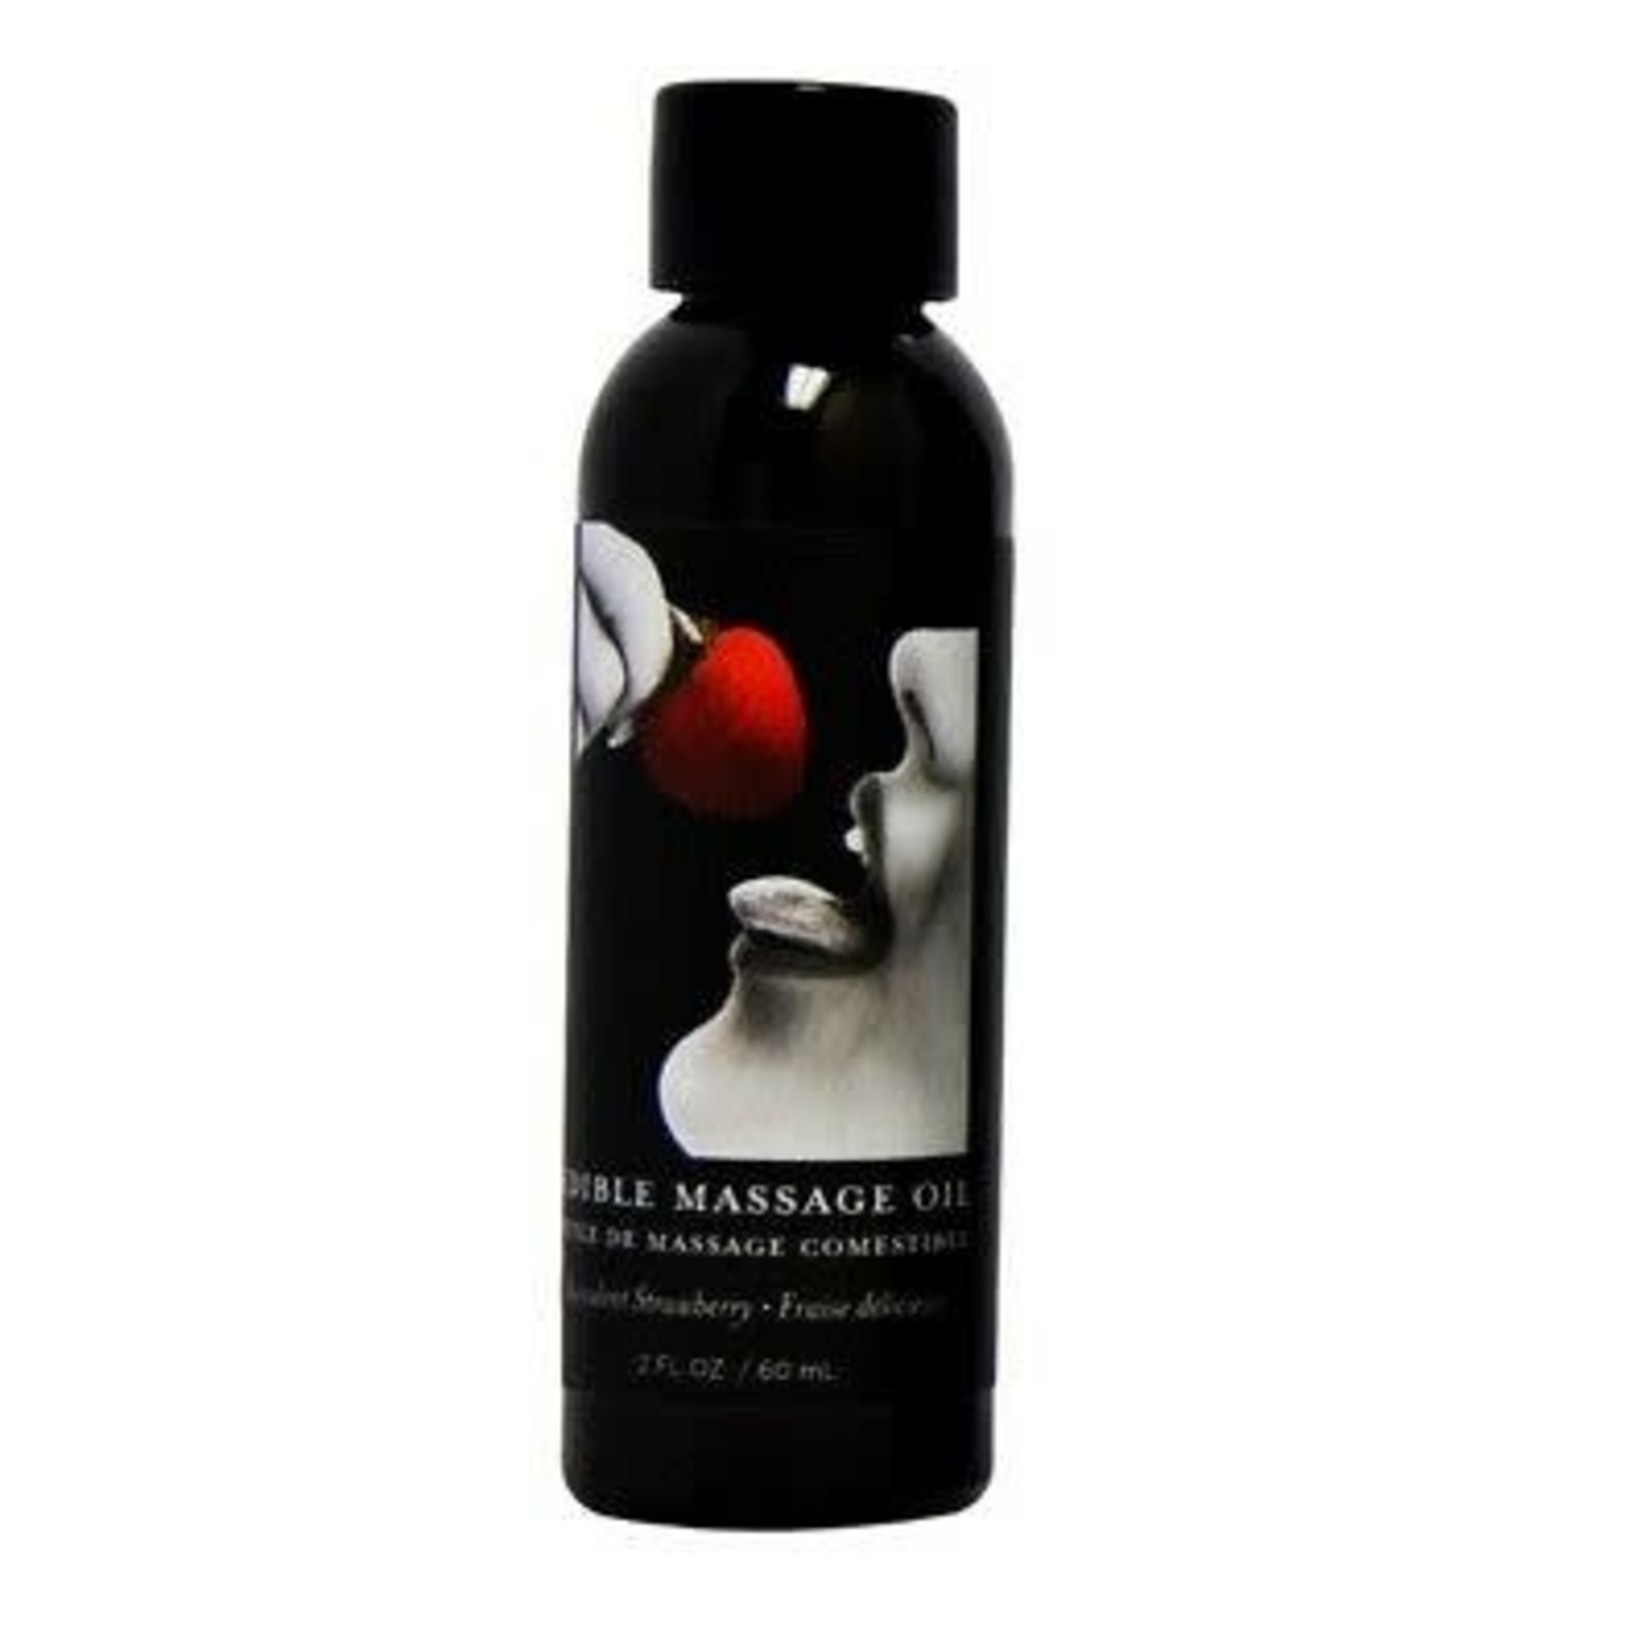 EARTHLY BODY EARTHLY BODY - EDIBLE MASSAGE OIL 2OZ. - SUCCULENT STRAWBERRY